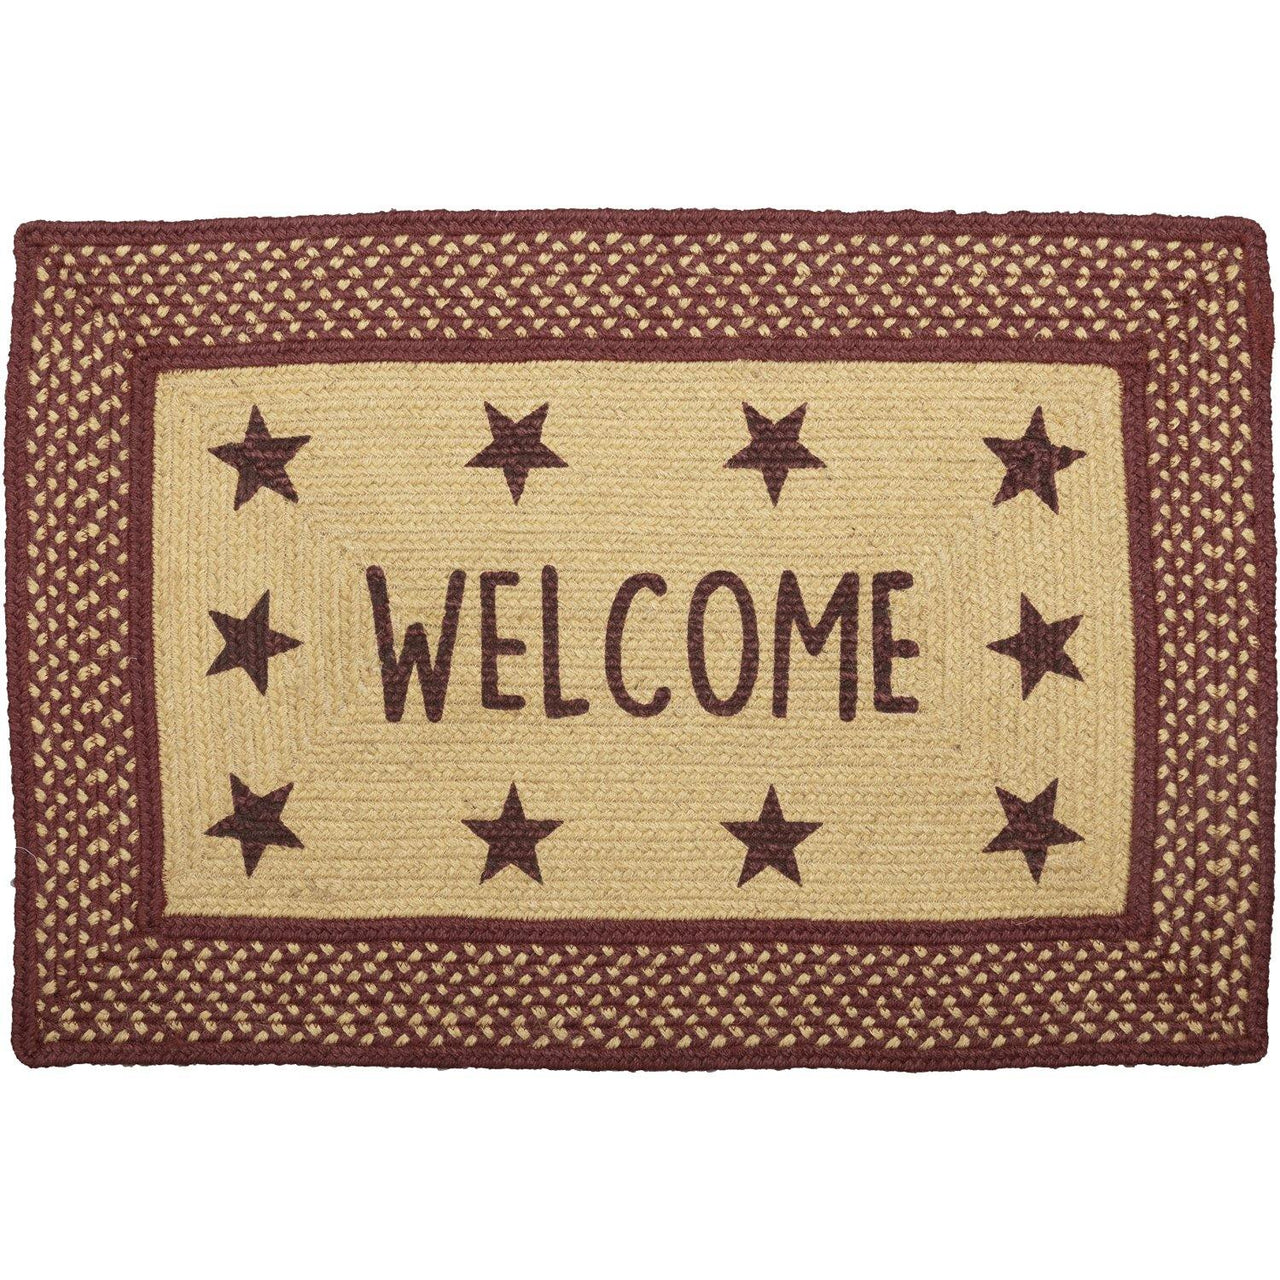 Burgundy Red Primitive Jute Braided Rug Rect Stencil Stars Welcome 20"x30" with Rug Pad VHC Brands - The Fox Decor